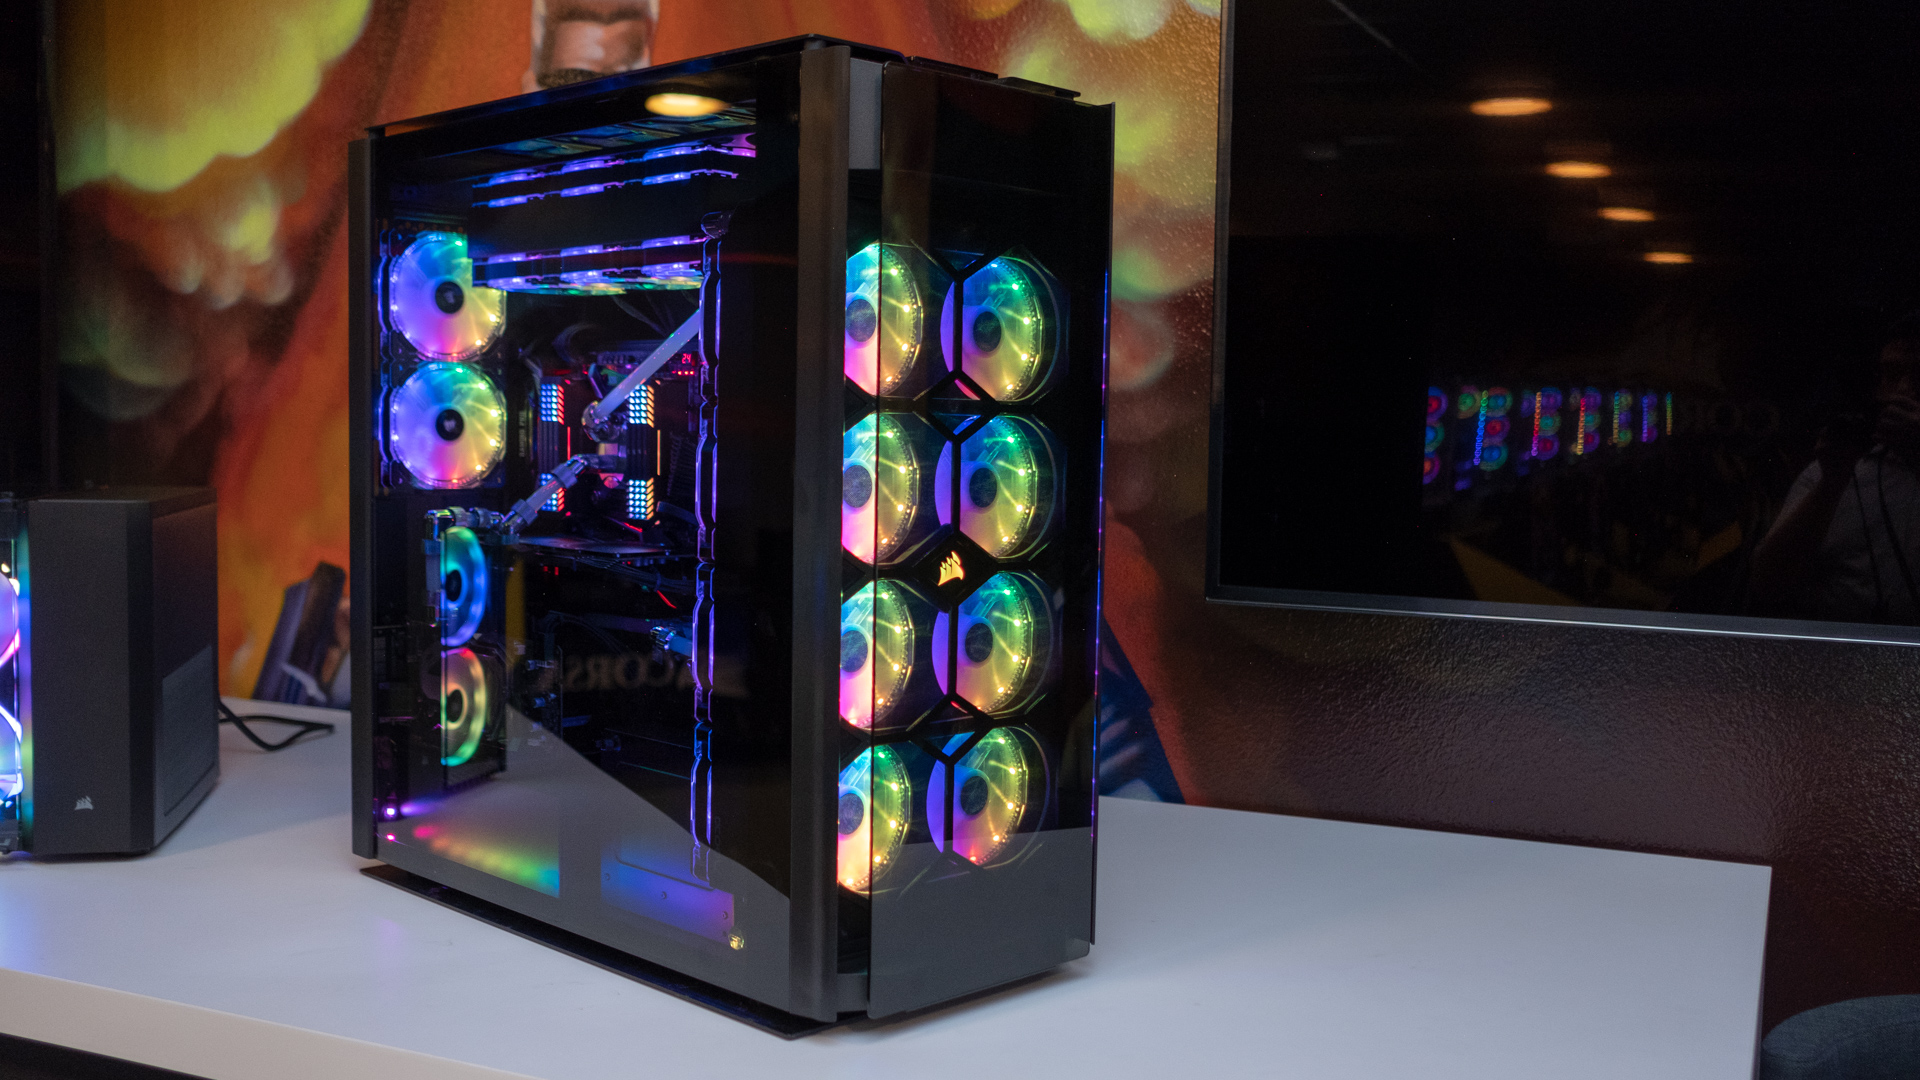 How Corsair brought innovation to the world's PC case |